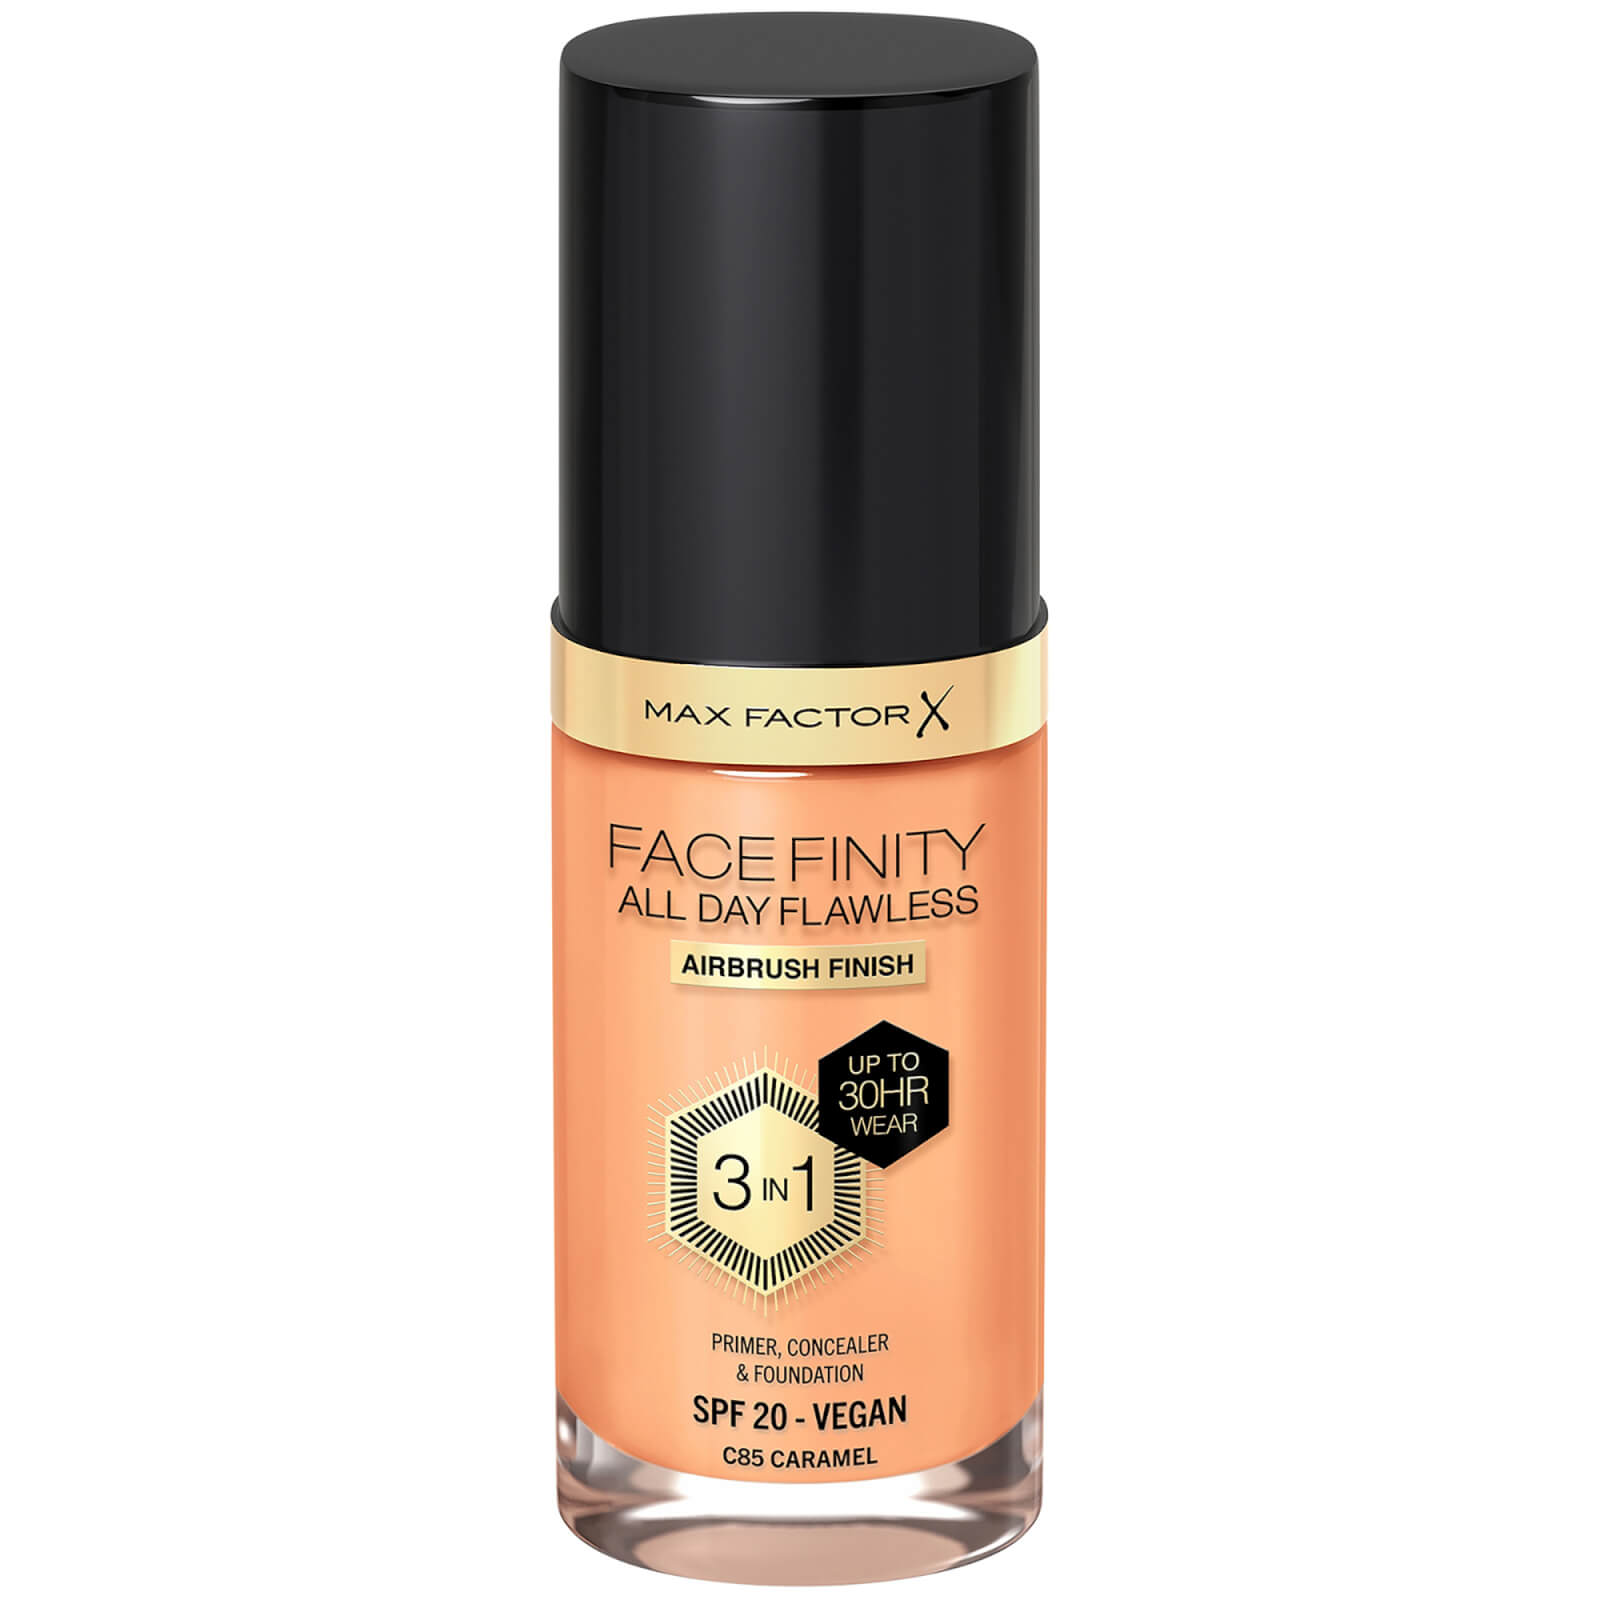 Max Factor Facefinity All Day Flawless 3 in 1 Vegan Foundation 30ml (Various Shades) - C85 - CARAMEL